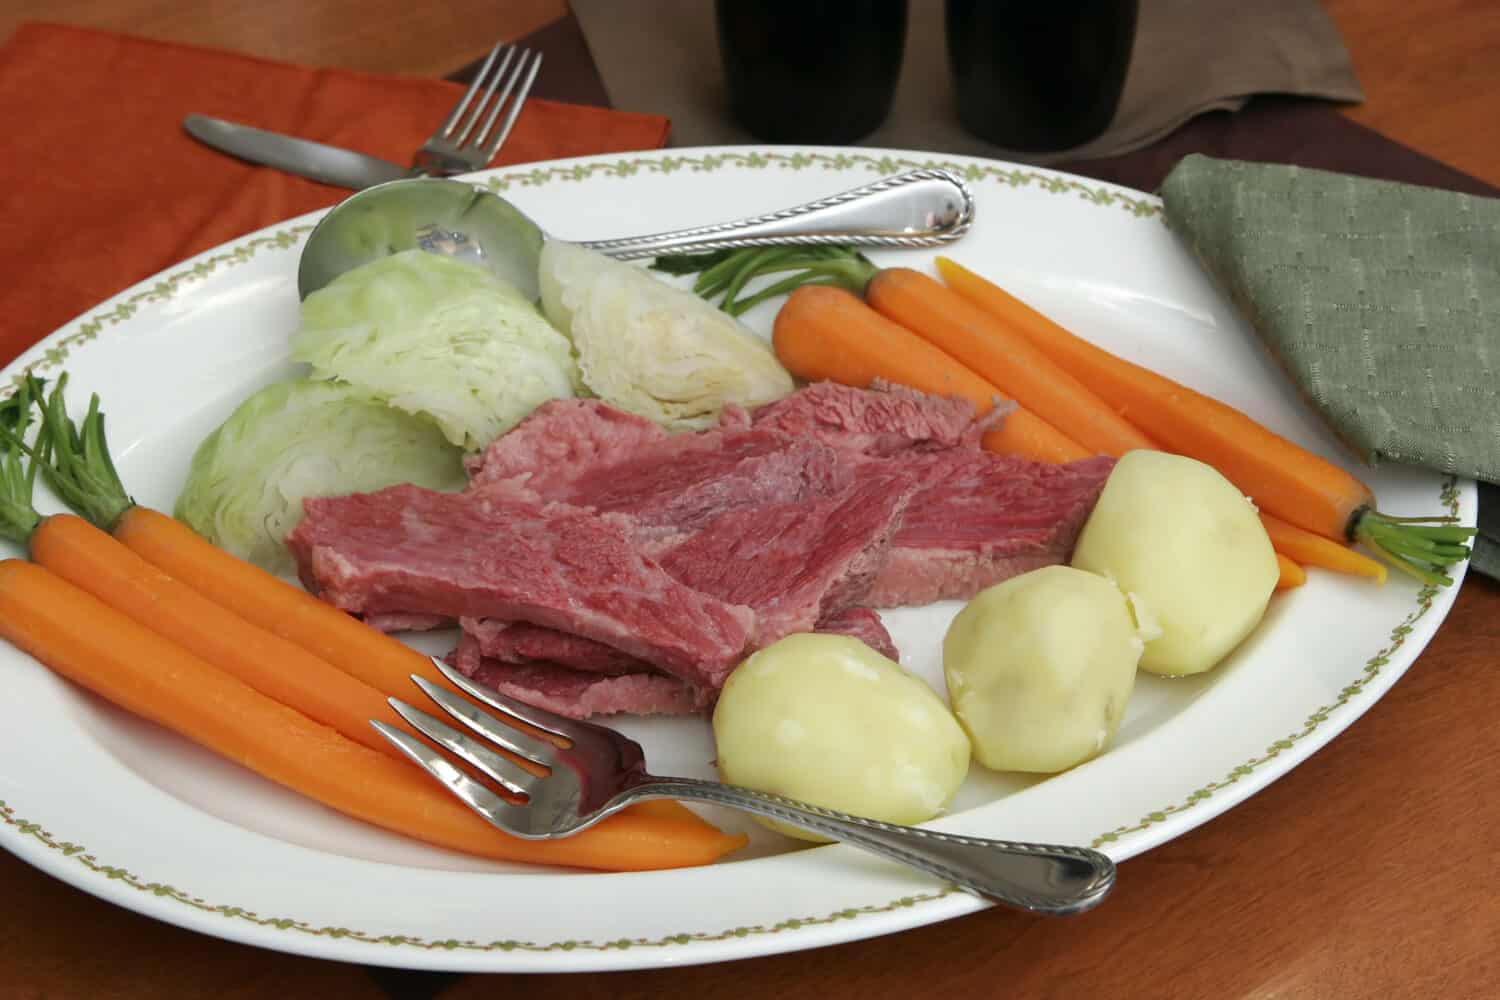 Traditional new England boiled dinner